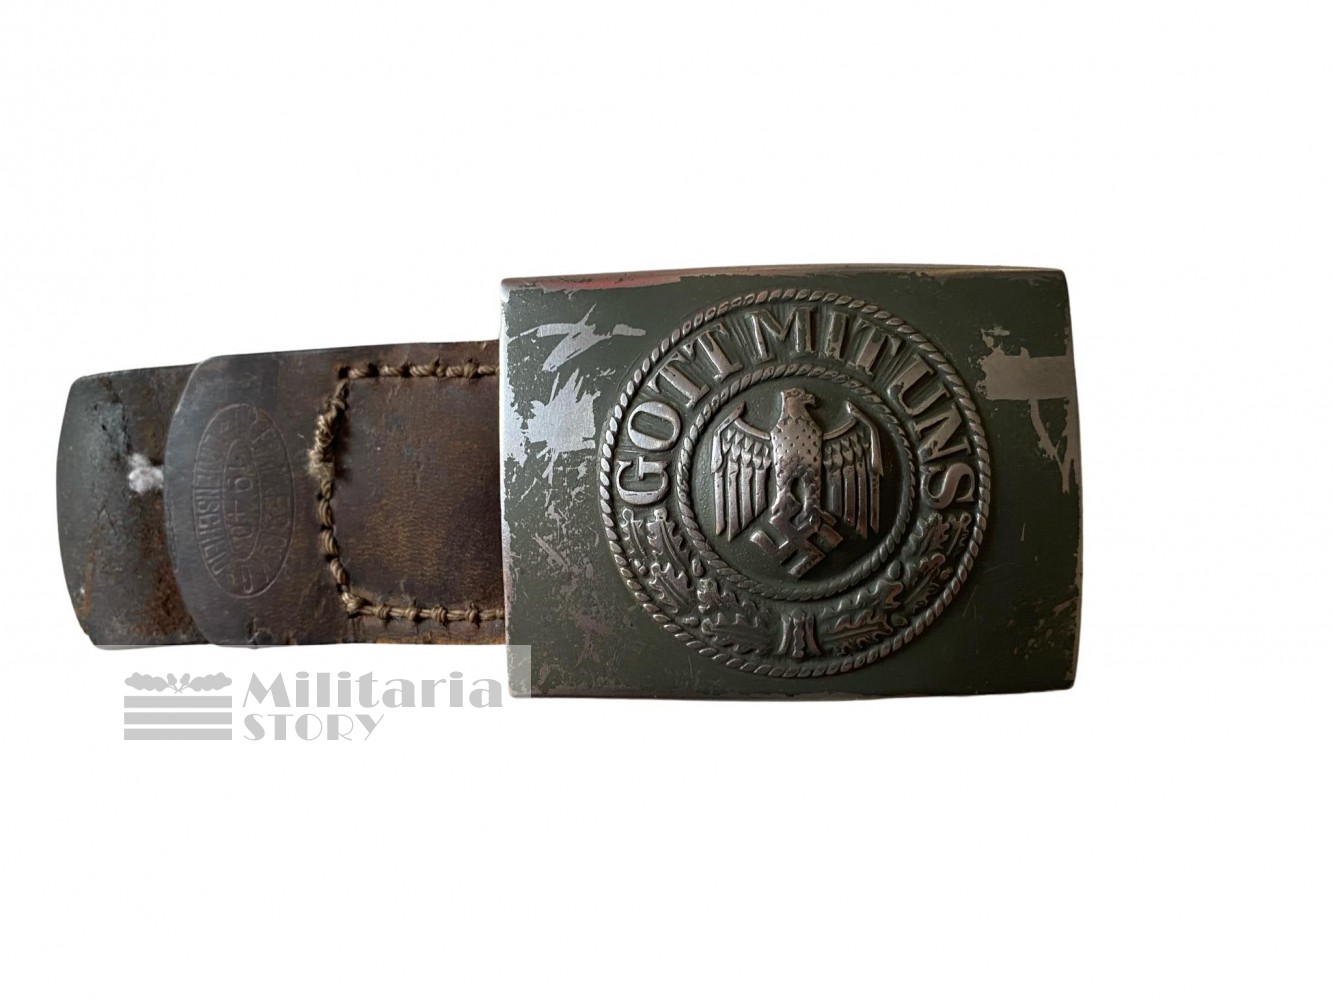 Heer Buckle with leather strap - Heer Buckle with leather strap: Third Reich Equipment